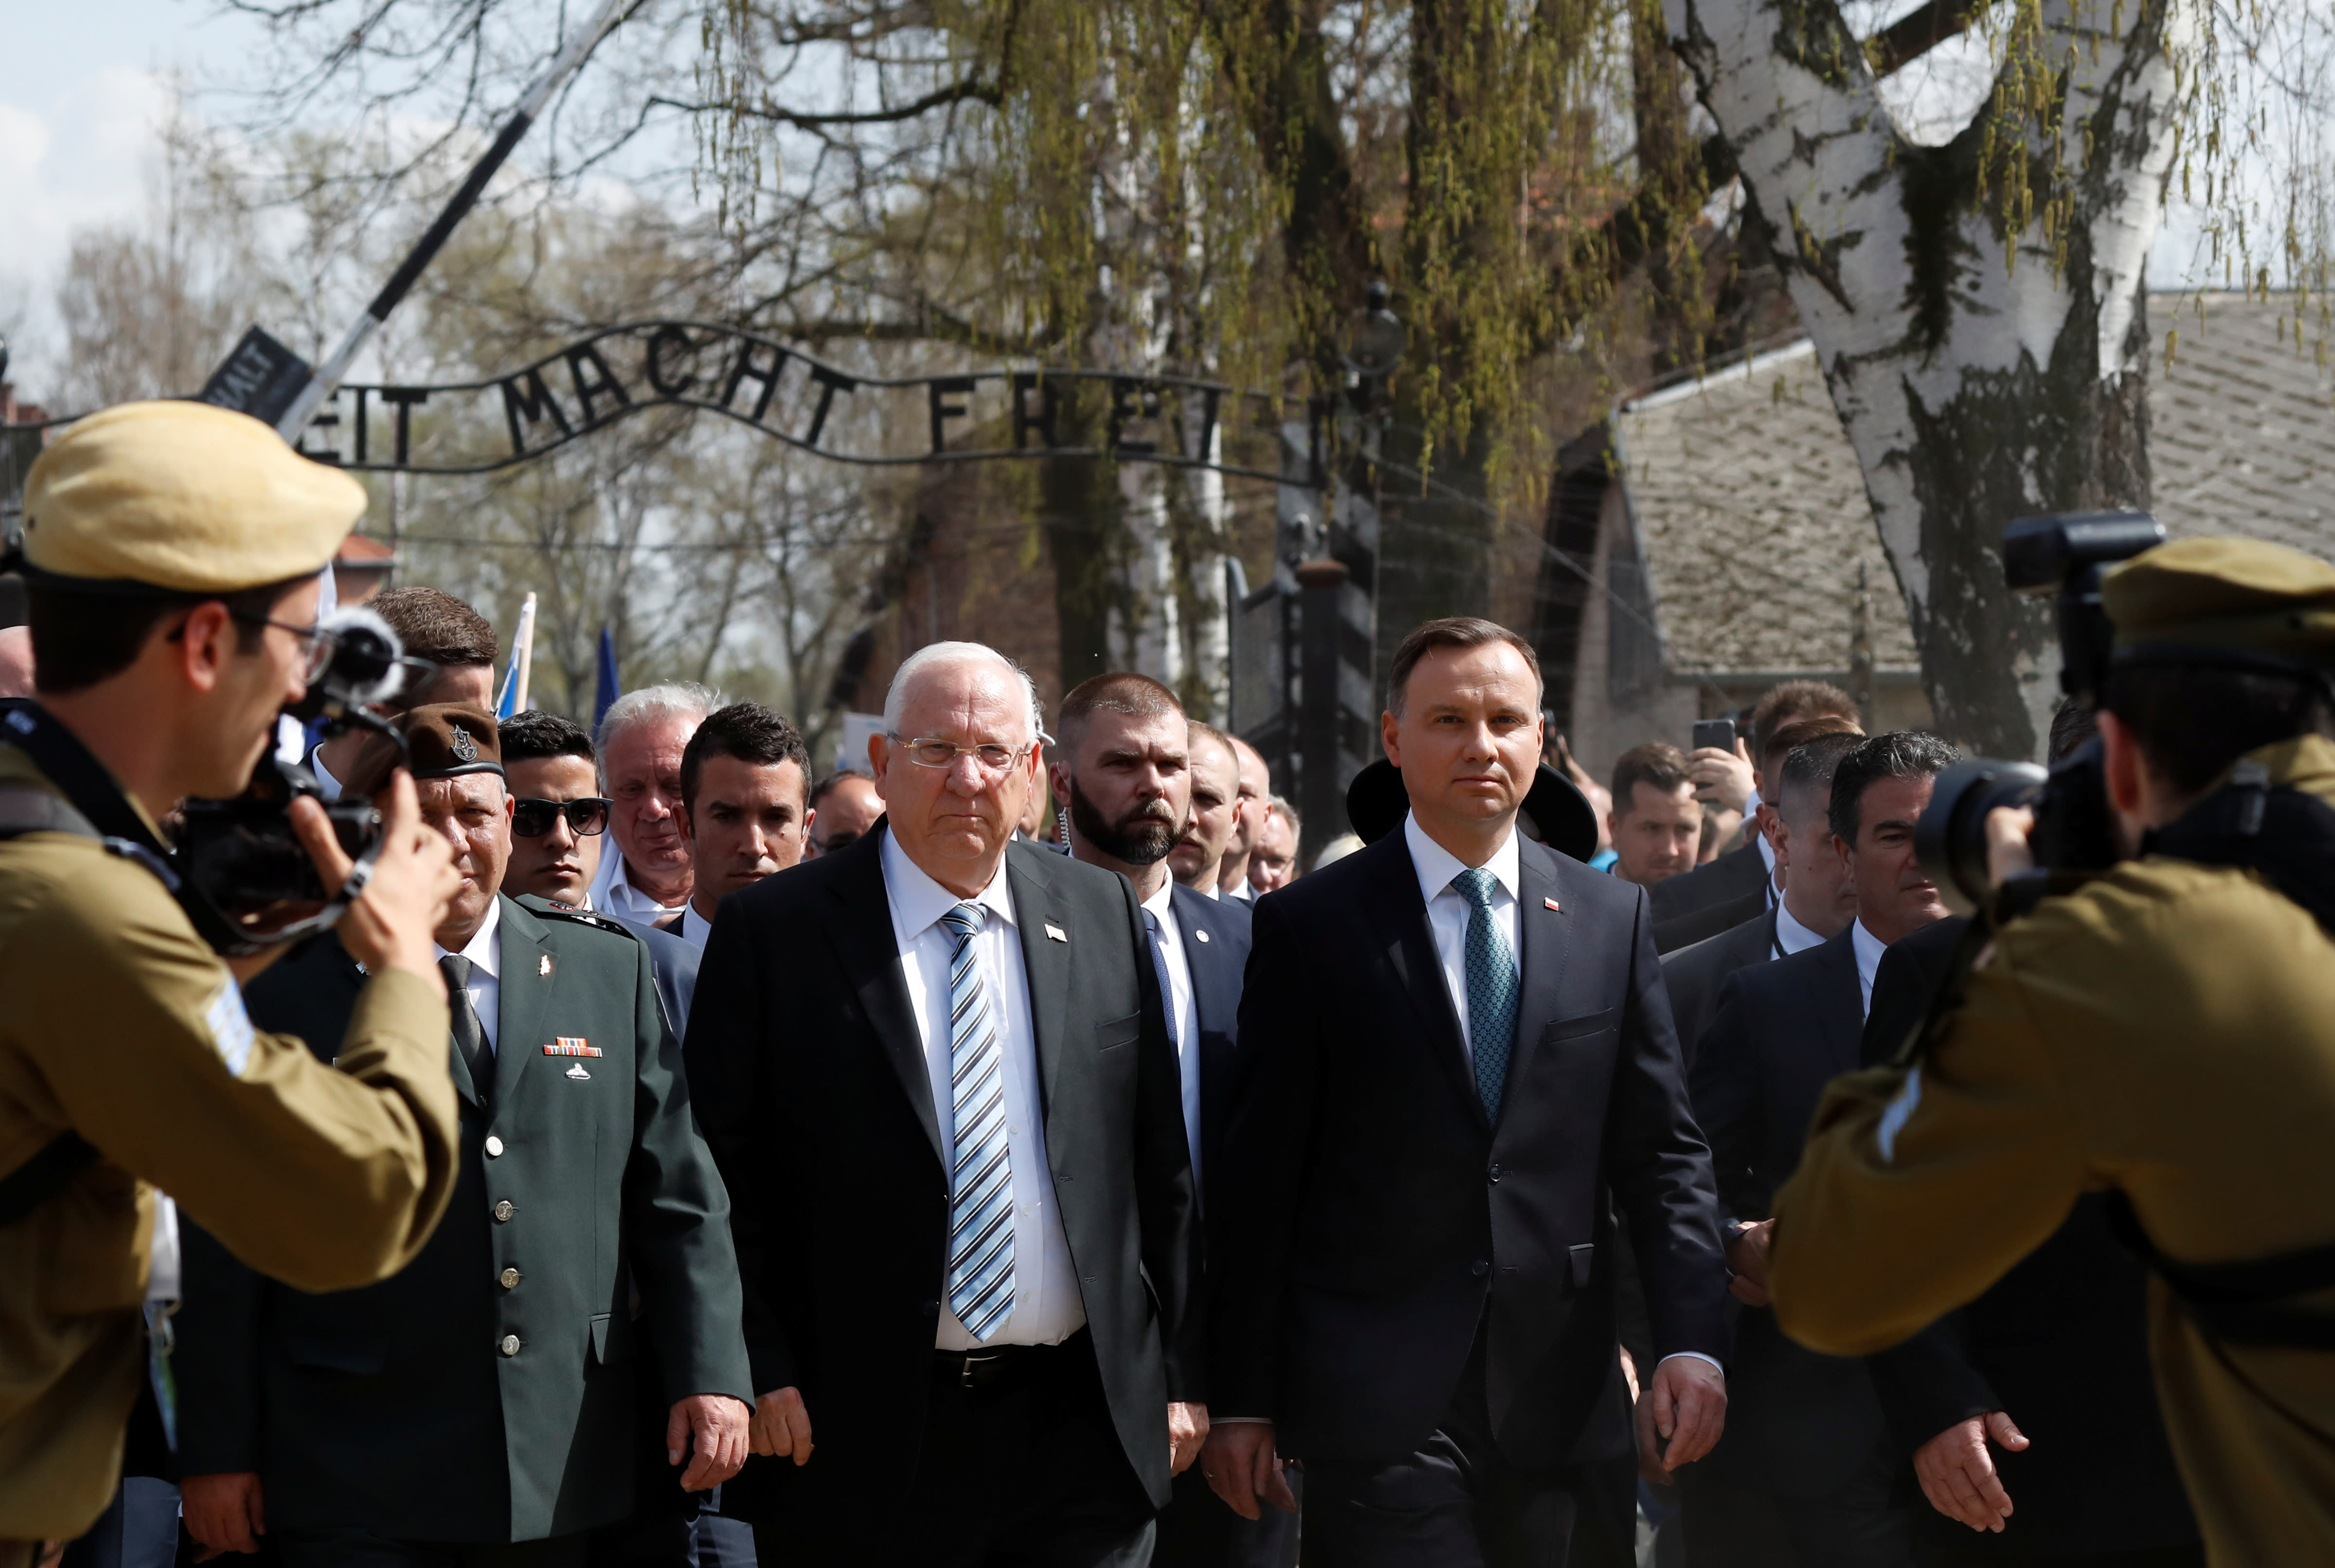 Israeli President Reuven Rivlin and Polish President Andrzej Duda are seen at the Entrance to Auschwitz as they take part in the annual March of the Living (KACPER PEMPEL/REUTERS)